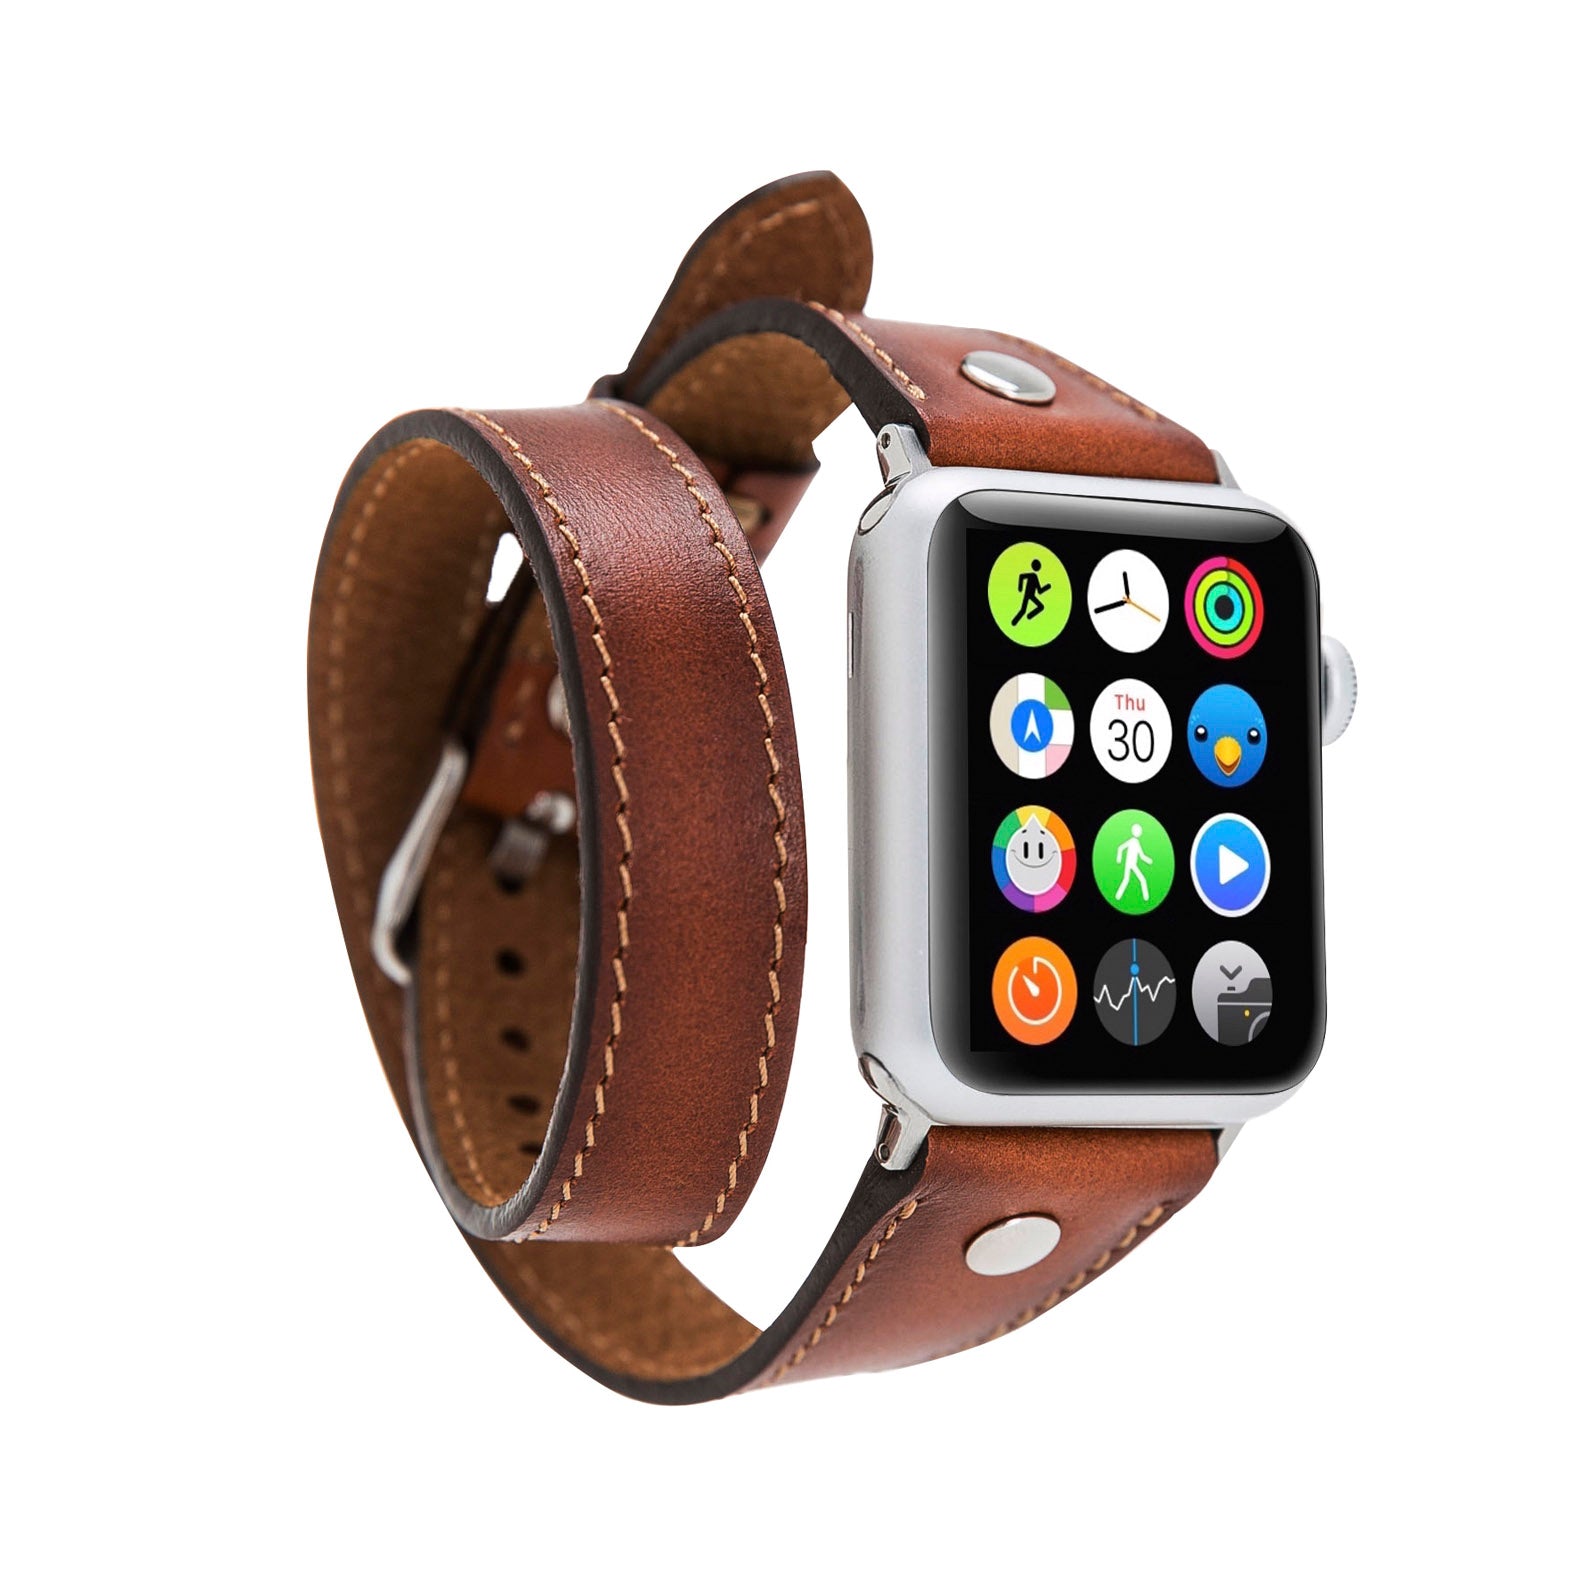 Slim Double Tour Strap: Full Grain Leather Band for Apple Watch 38mm / 40mm - EFFECT BROWN - saracleather